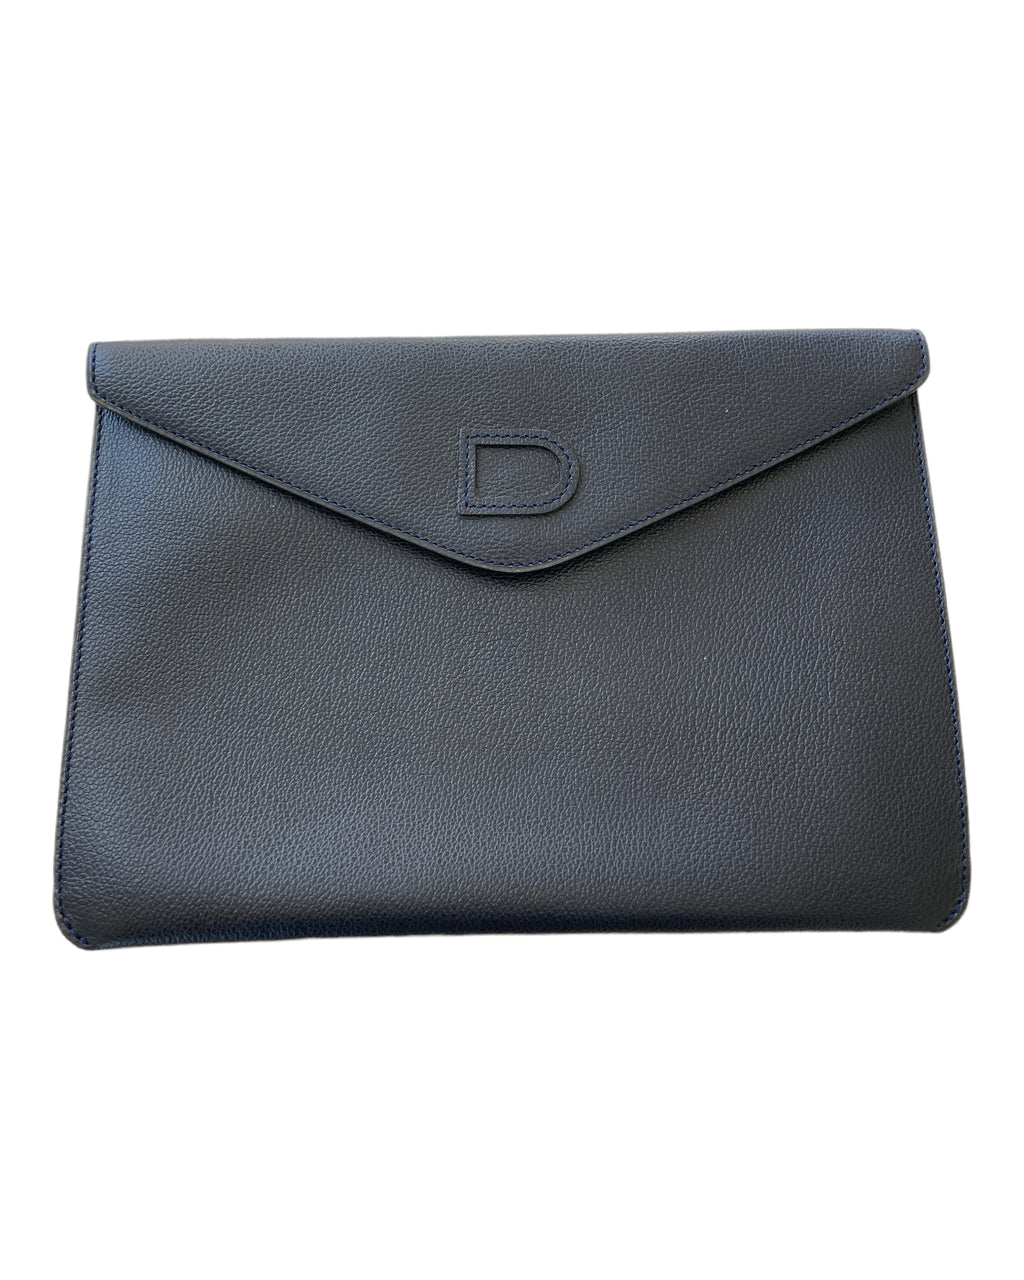 Clare V - Authenticated Clutch Bag - Leather Black for Women, Good Condition